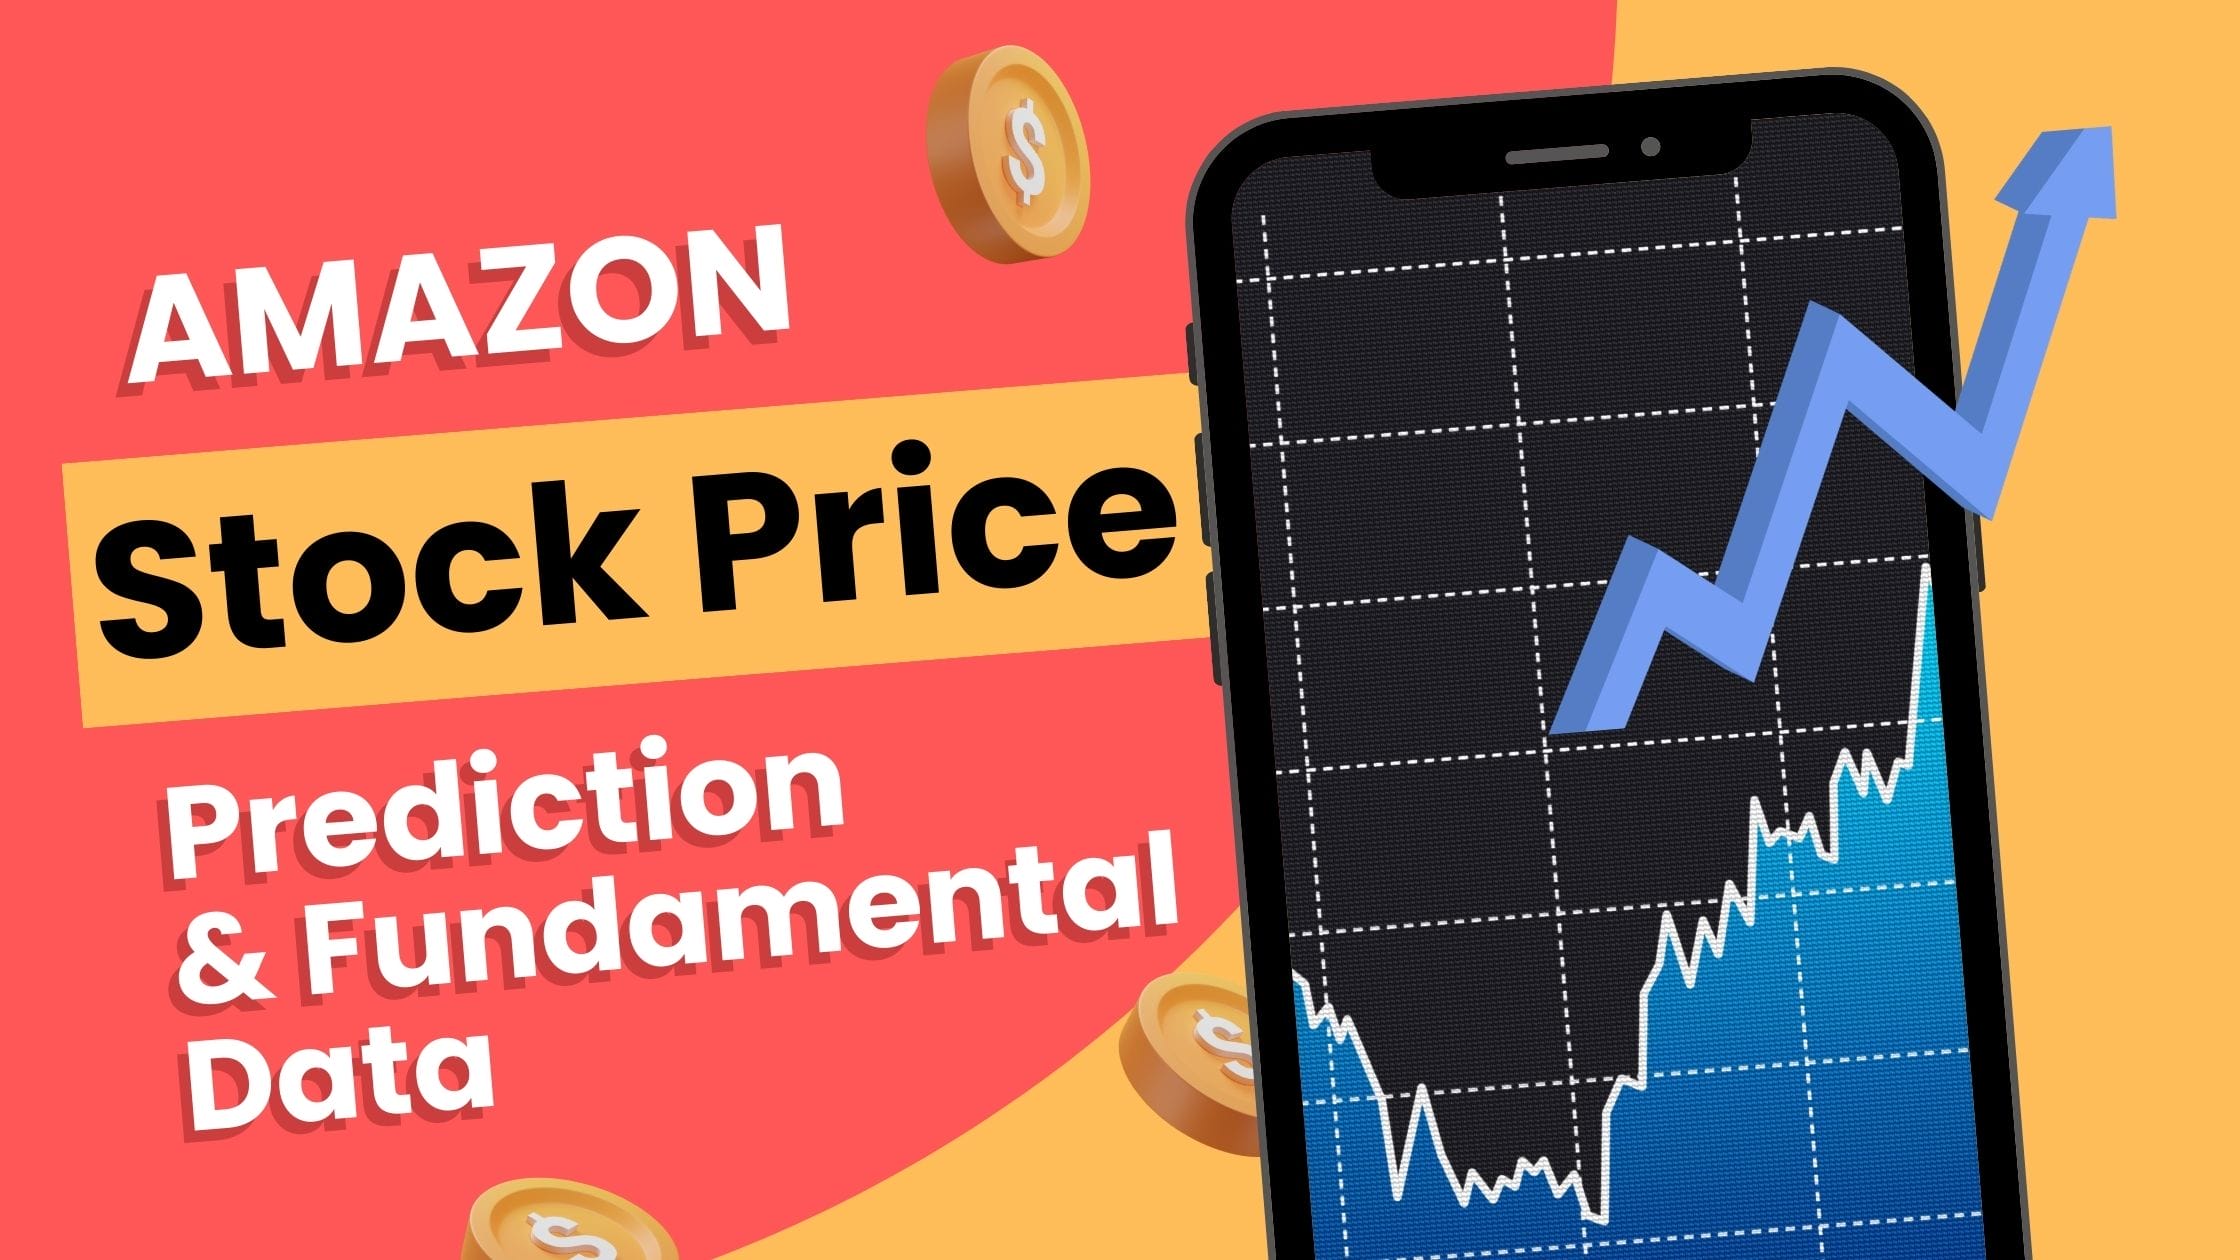 You are currently viewing Amazon Stock Price Prediction 2023, 2025, 2030 & Fundamental Data (February)